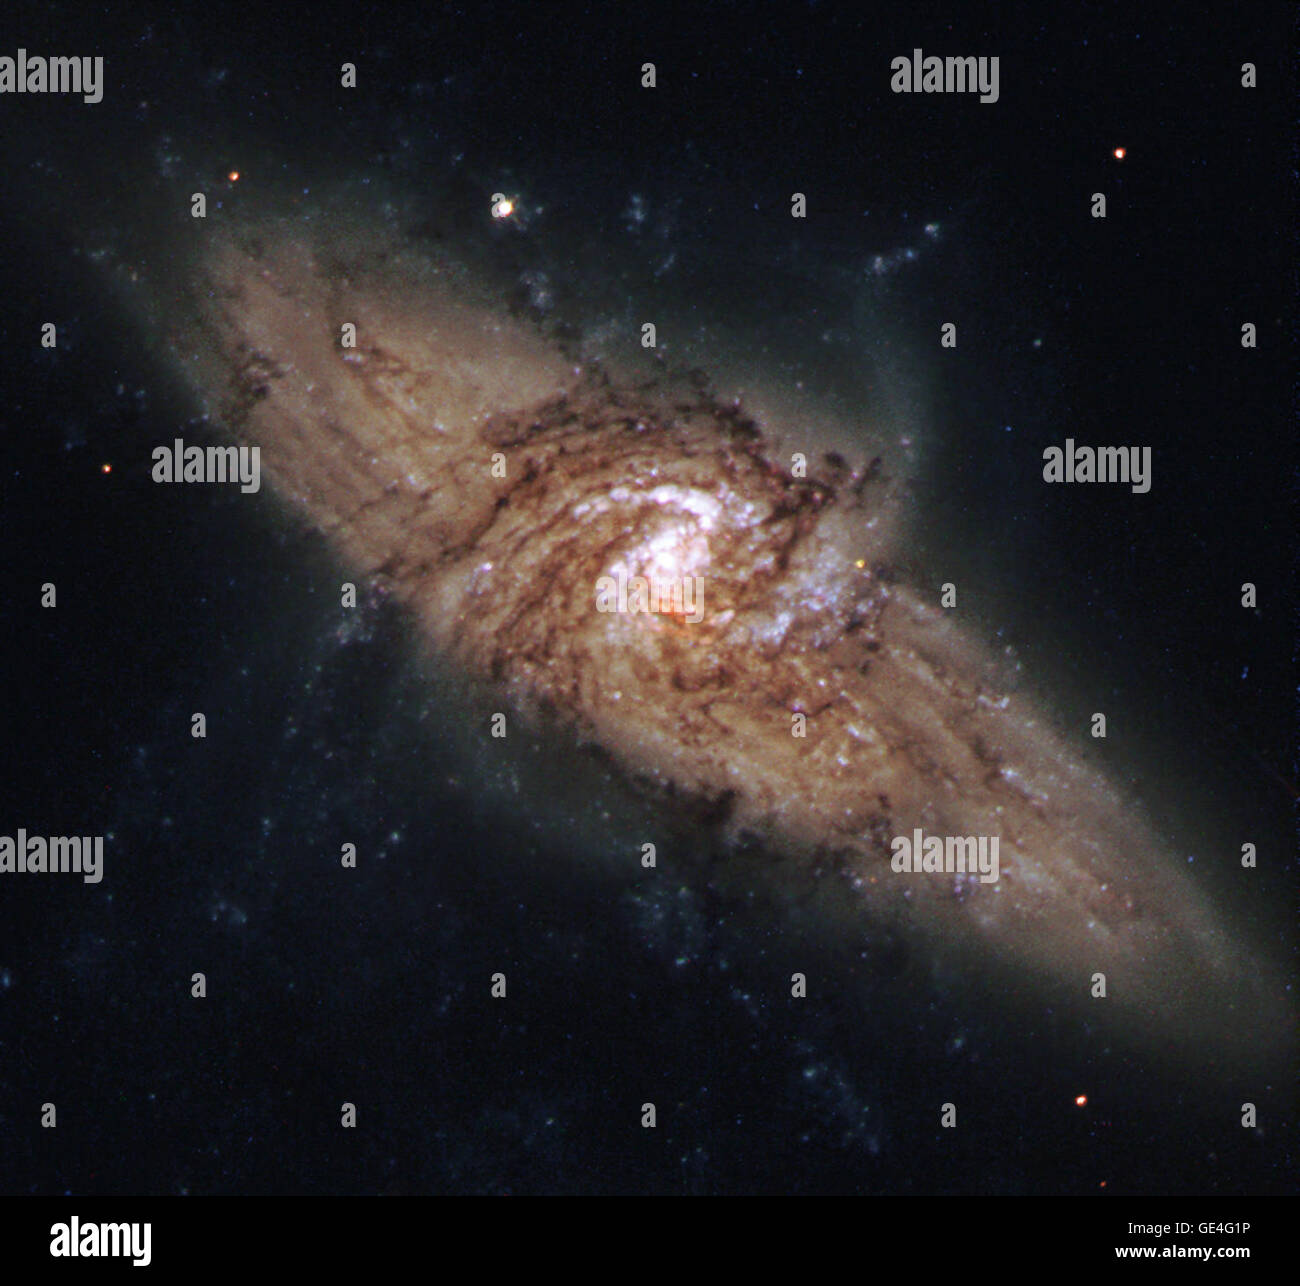 This image from NASA's Hubble Space Telescope and its Wide Field and Planetary Camera 2 (WFPC2) shows the unique galaxy pair called NGC 3314. Through an extraordinary chance alignment, a face-on spiral galaxy lies precisely in front of another larger spiral. This line-up provides us with the rare chance to visualize dark material within the front galaxy, seen only because it is silhouetted against the object behind it. Dust lying in the spiral arms of the foreground galaxy stands out where it absorbs light from the more distant galaxy. This silhouetting shows us where the interstellar dust clo Stock Photo